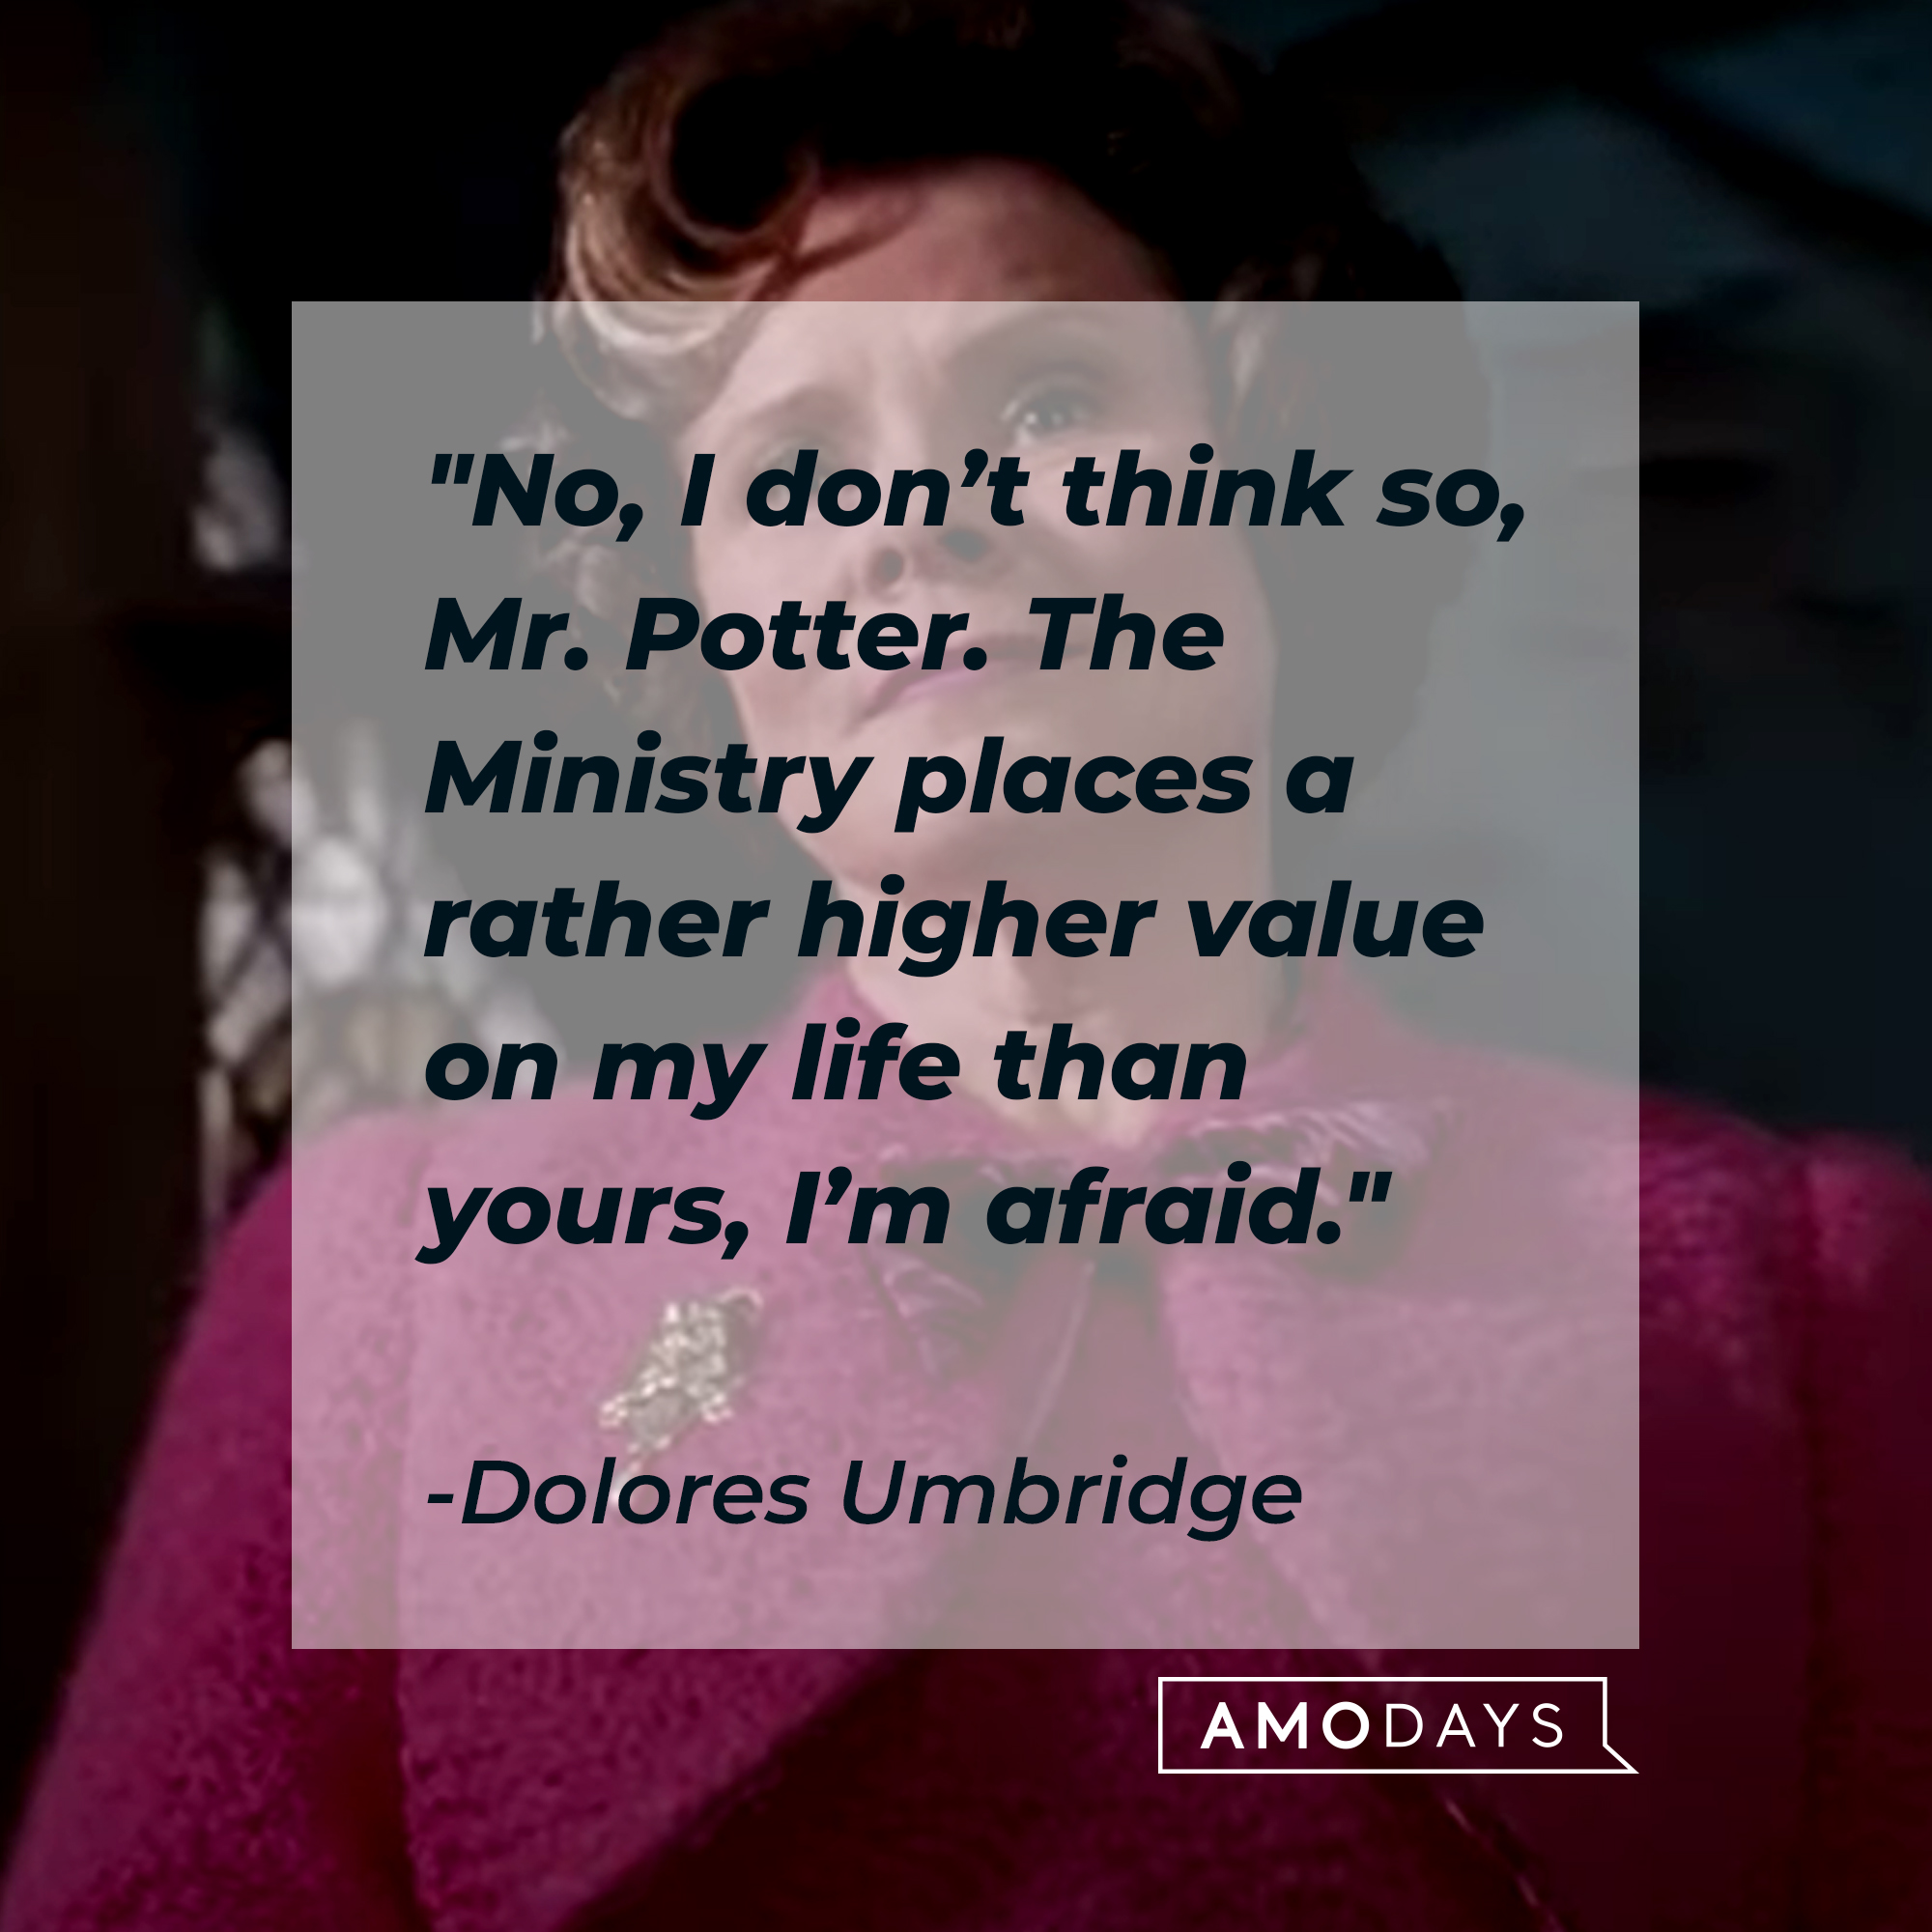 A photo of Dolores Umbridge with the quote, "No, I don't think so, Mr. Potter. The Ministry places a rather higher value on my life than yours, I'm afraid."  | Source: Facebook/harrypotter